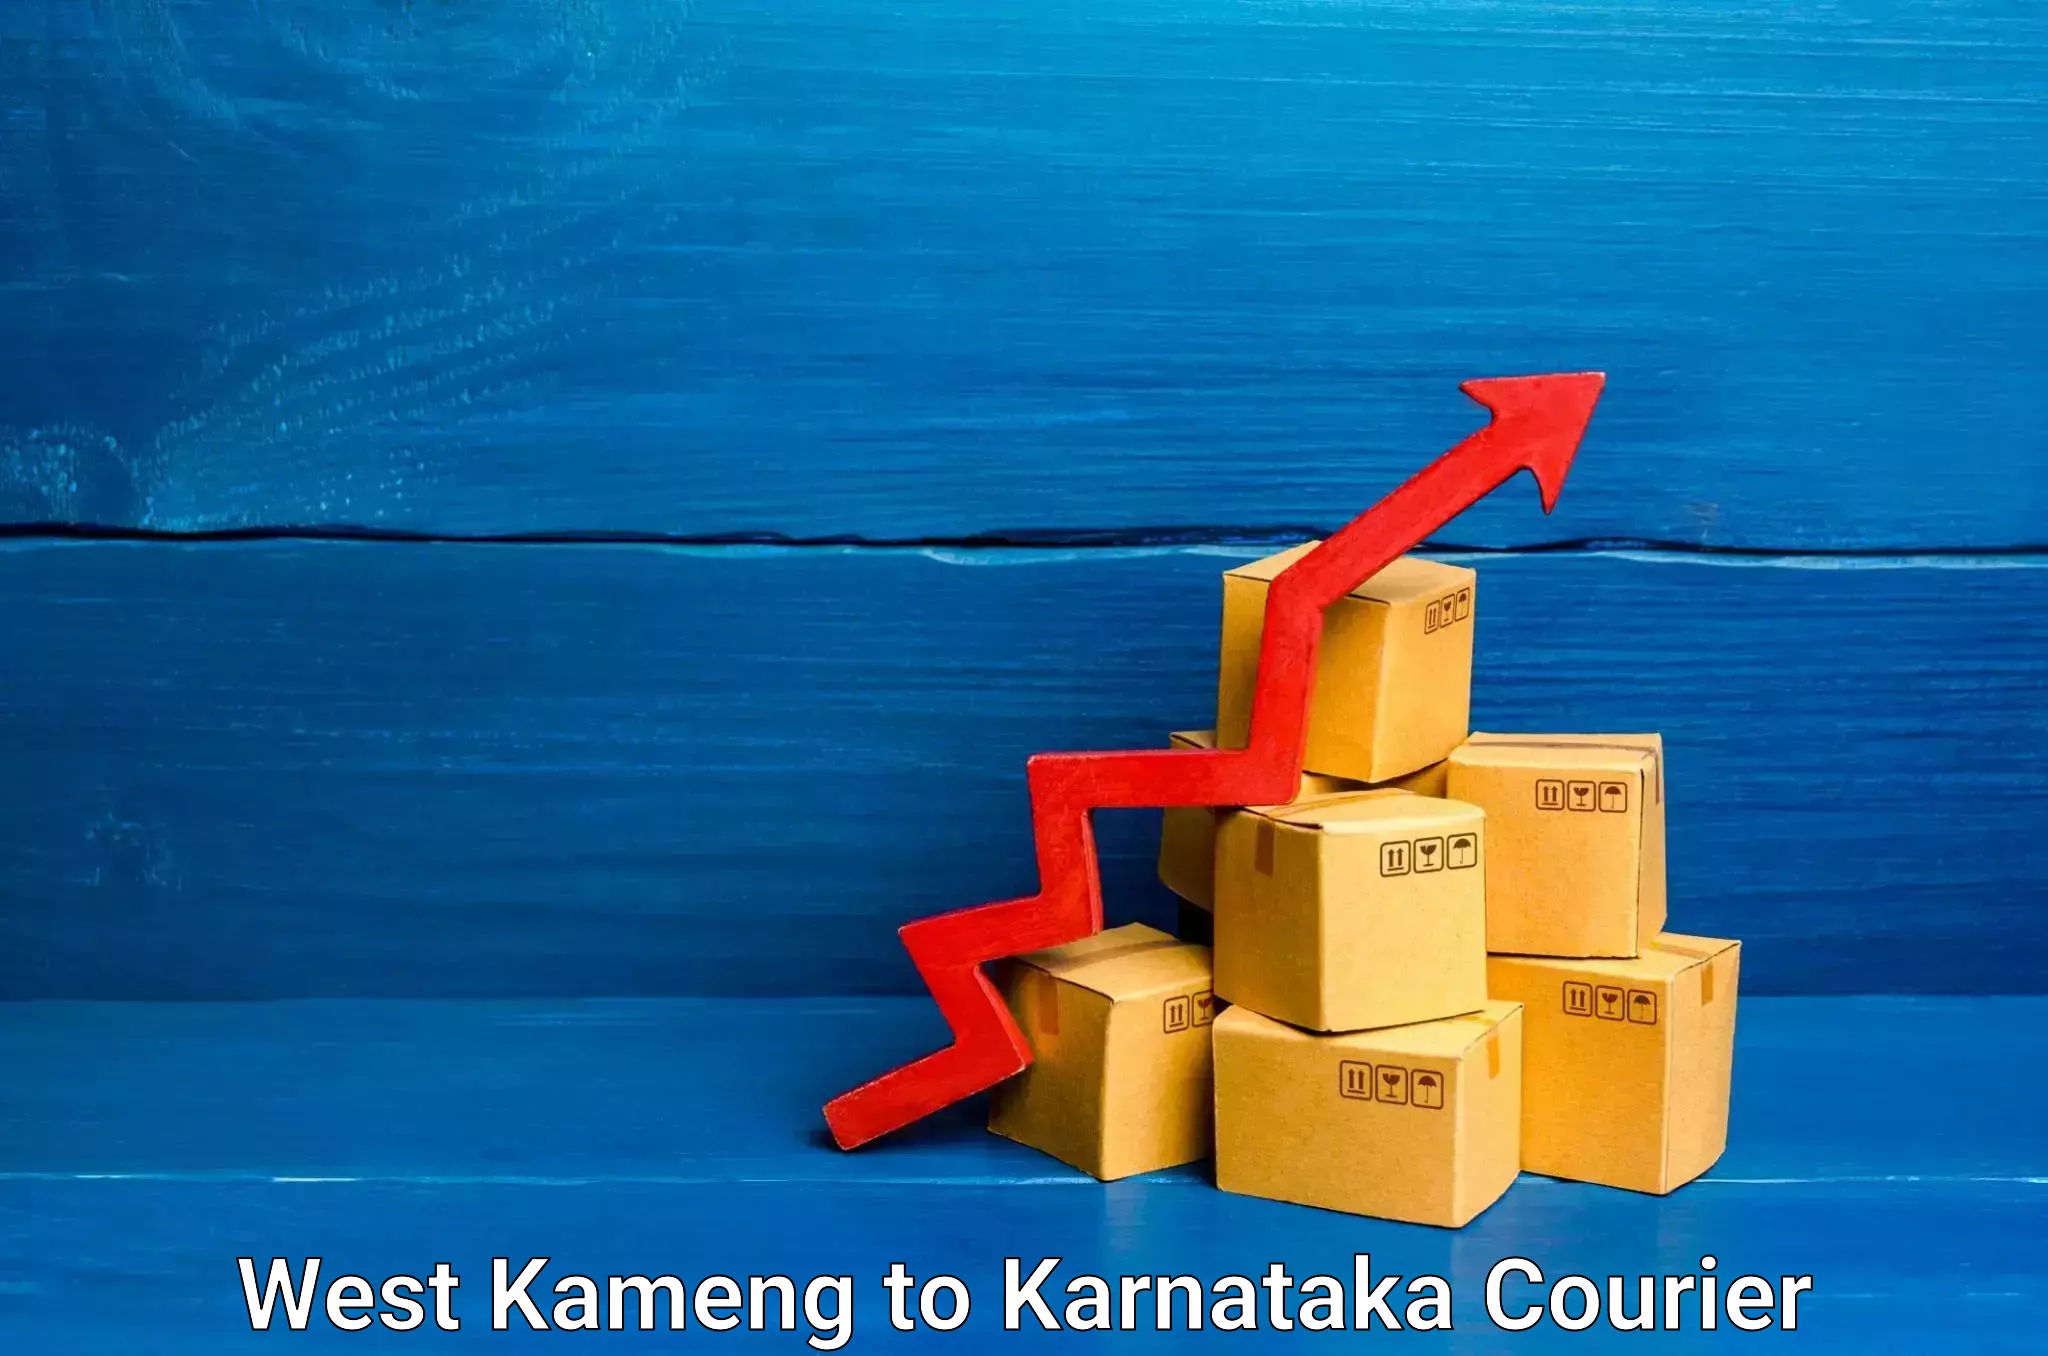 Tech-enabled shipping West Kameng to Manipal Academy of Higher Education